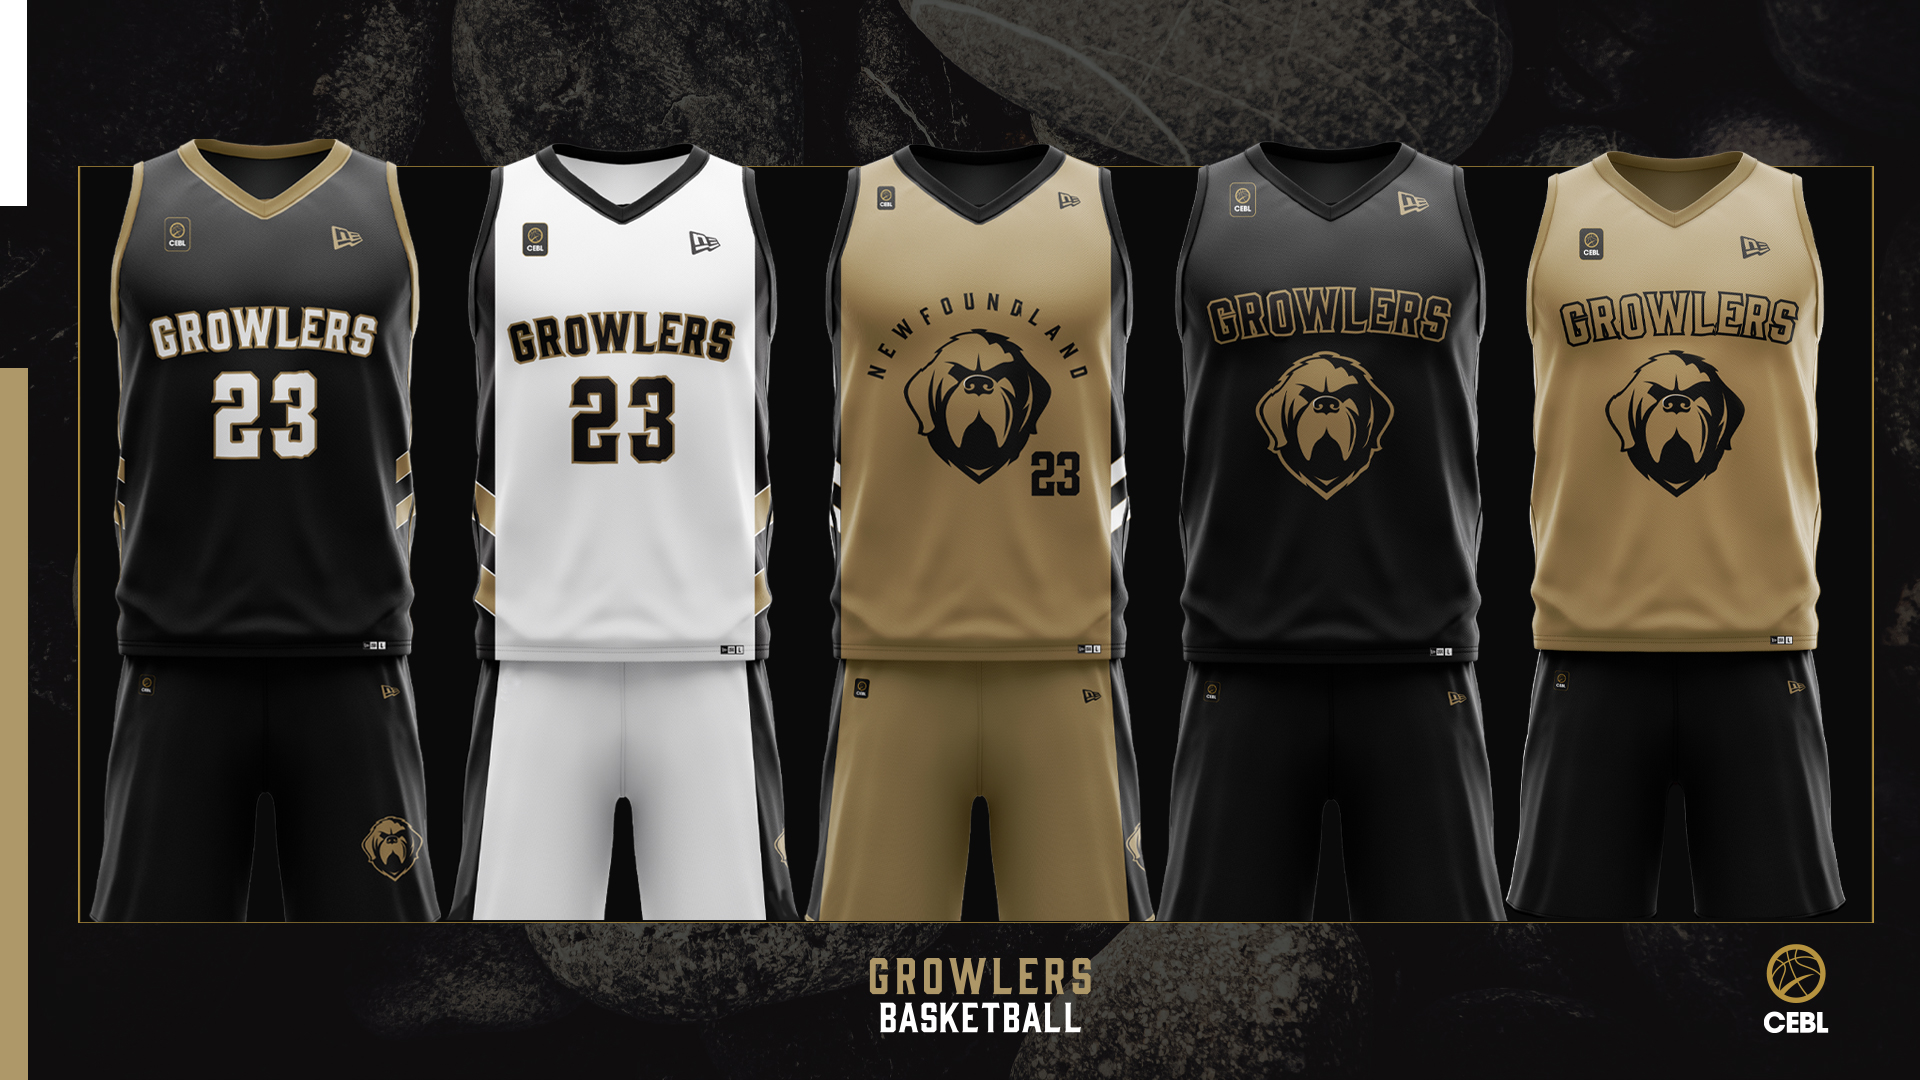 CEBL expands to 10 teams with addition of Newfoundland Growlers